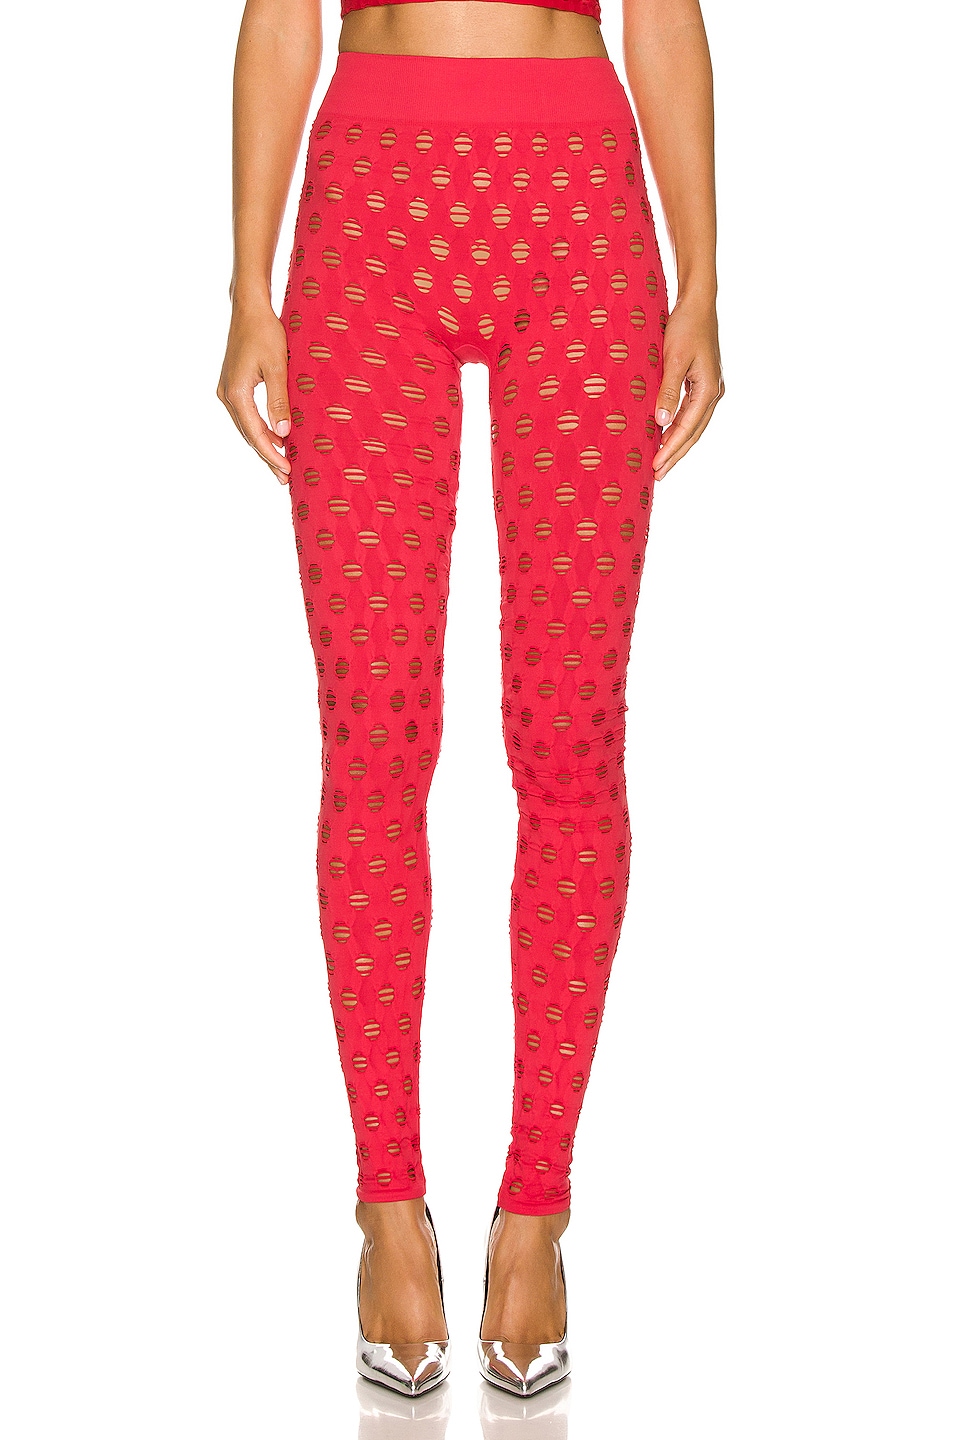 Image 1 of Maisie Wilen Perforated Legging in Tomato